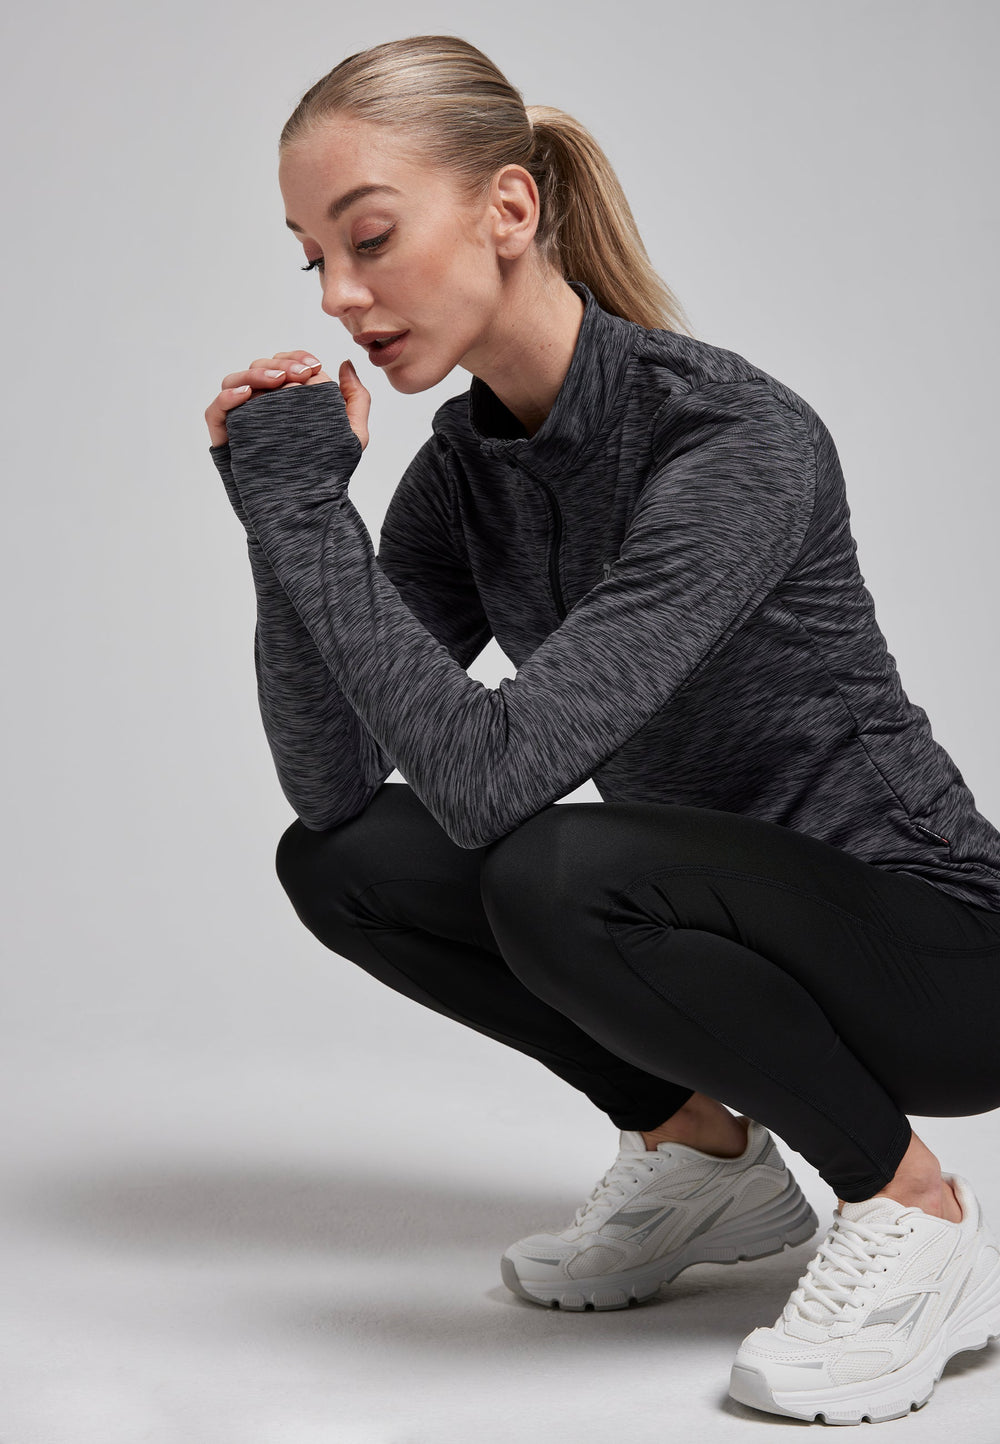 Women's sports shirt longsleeve Dry Cool - sustainable